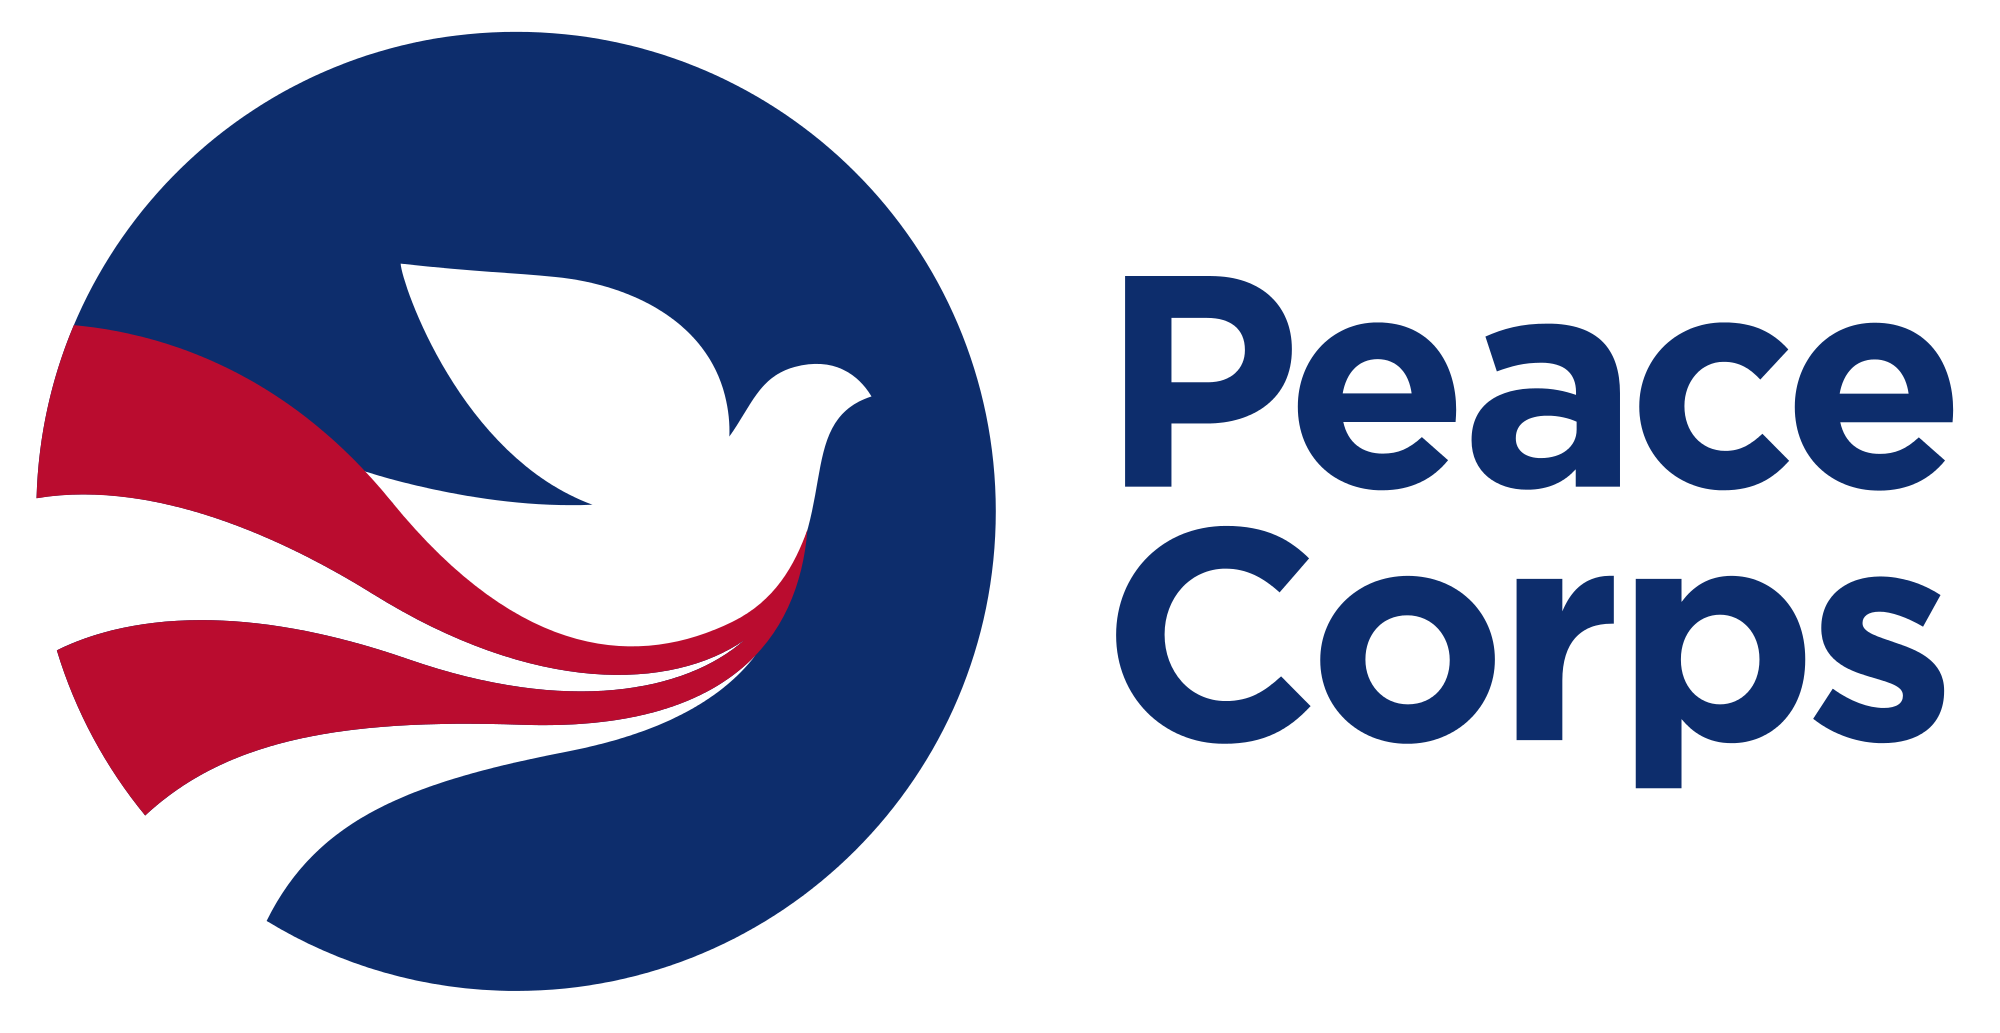 Peace_corps_logo16.svg_.png